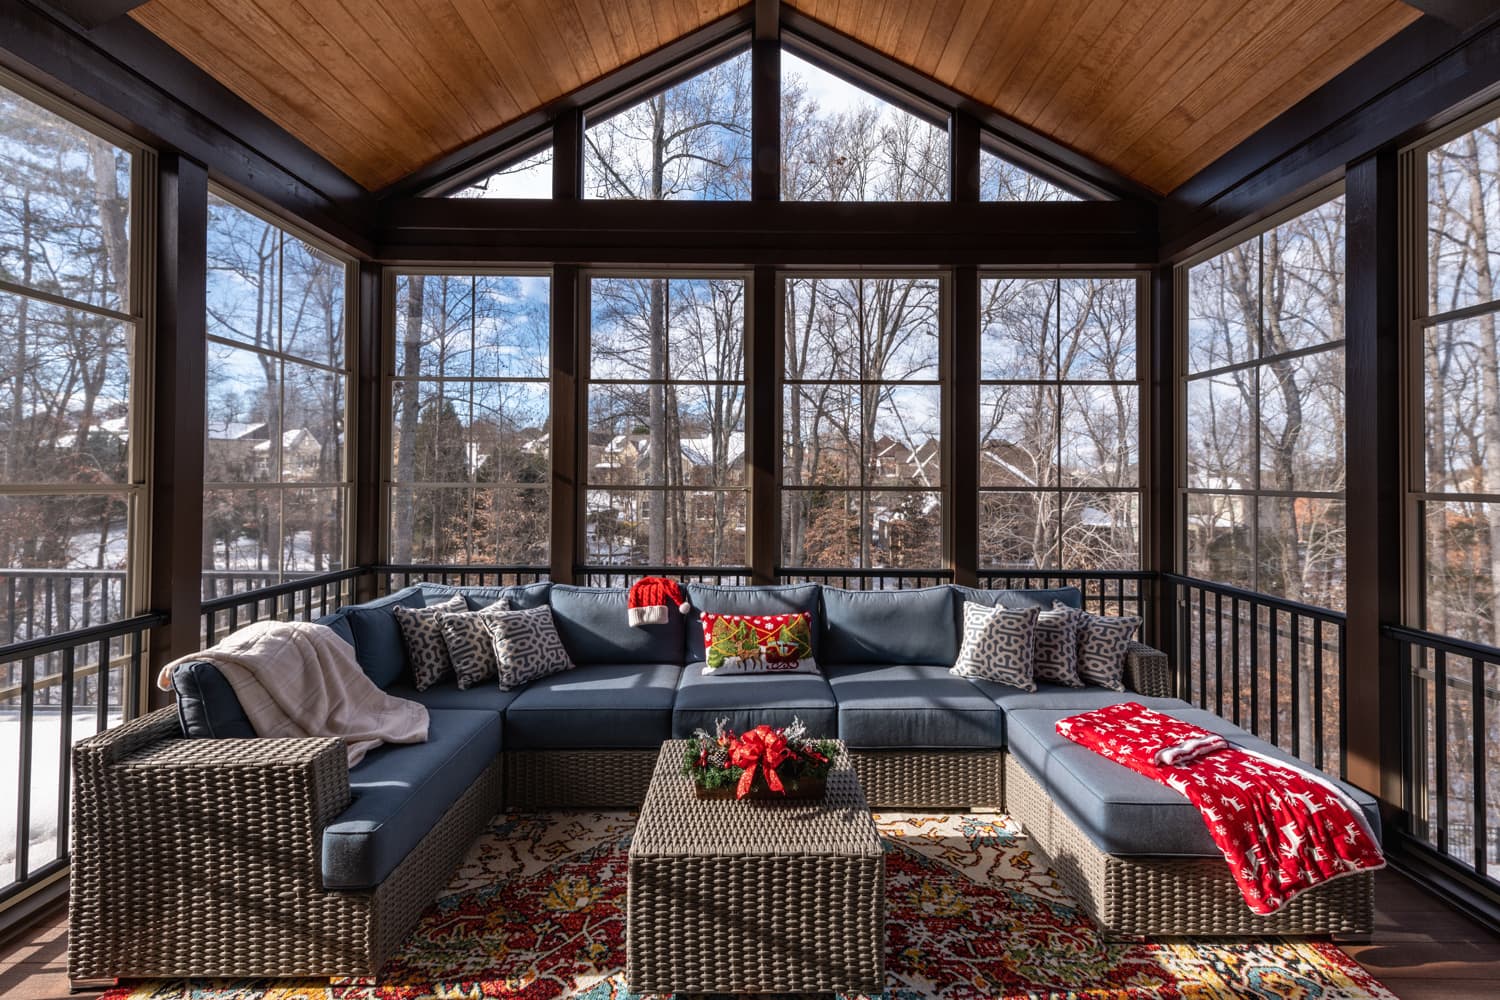 How To Insulate A Screened Porch For Winter